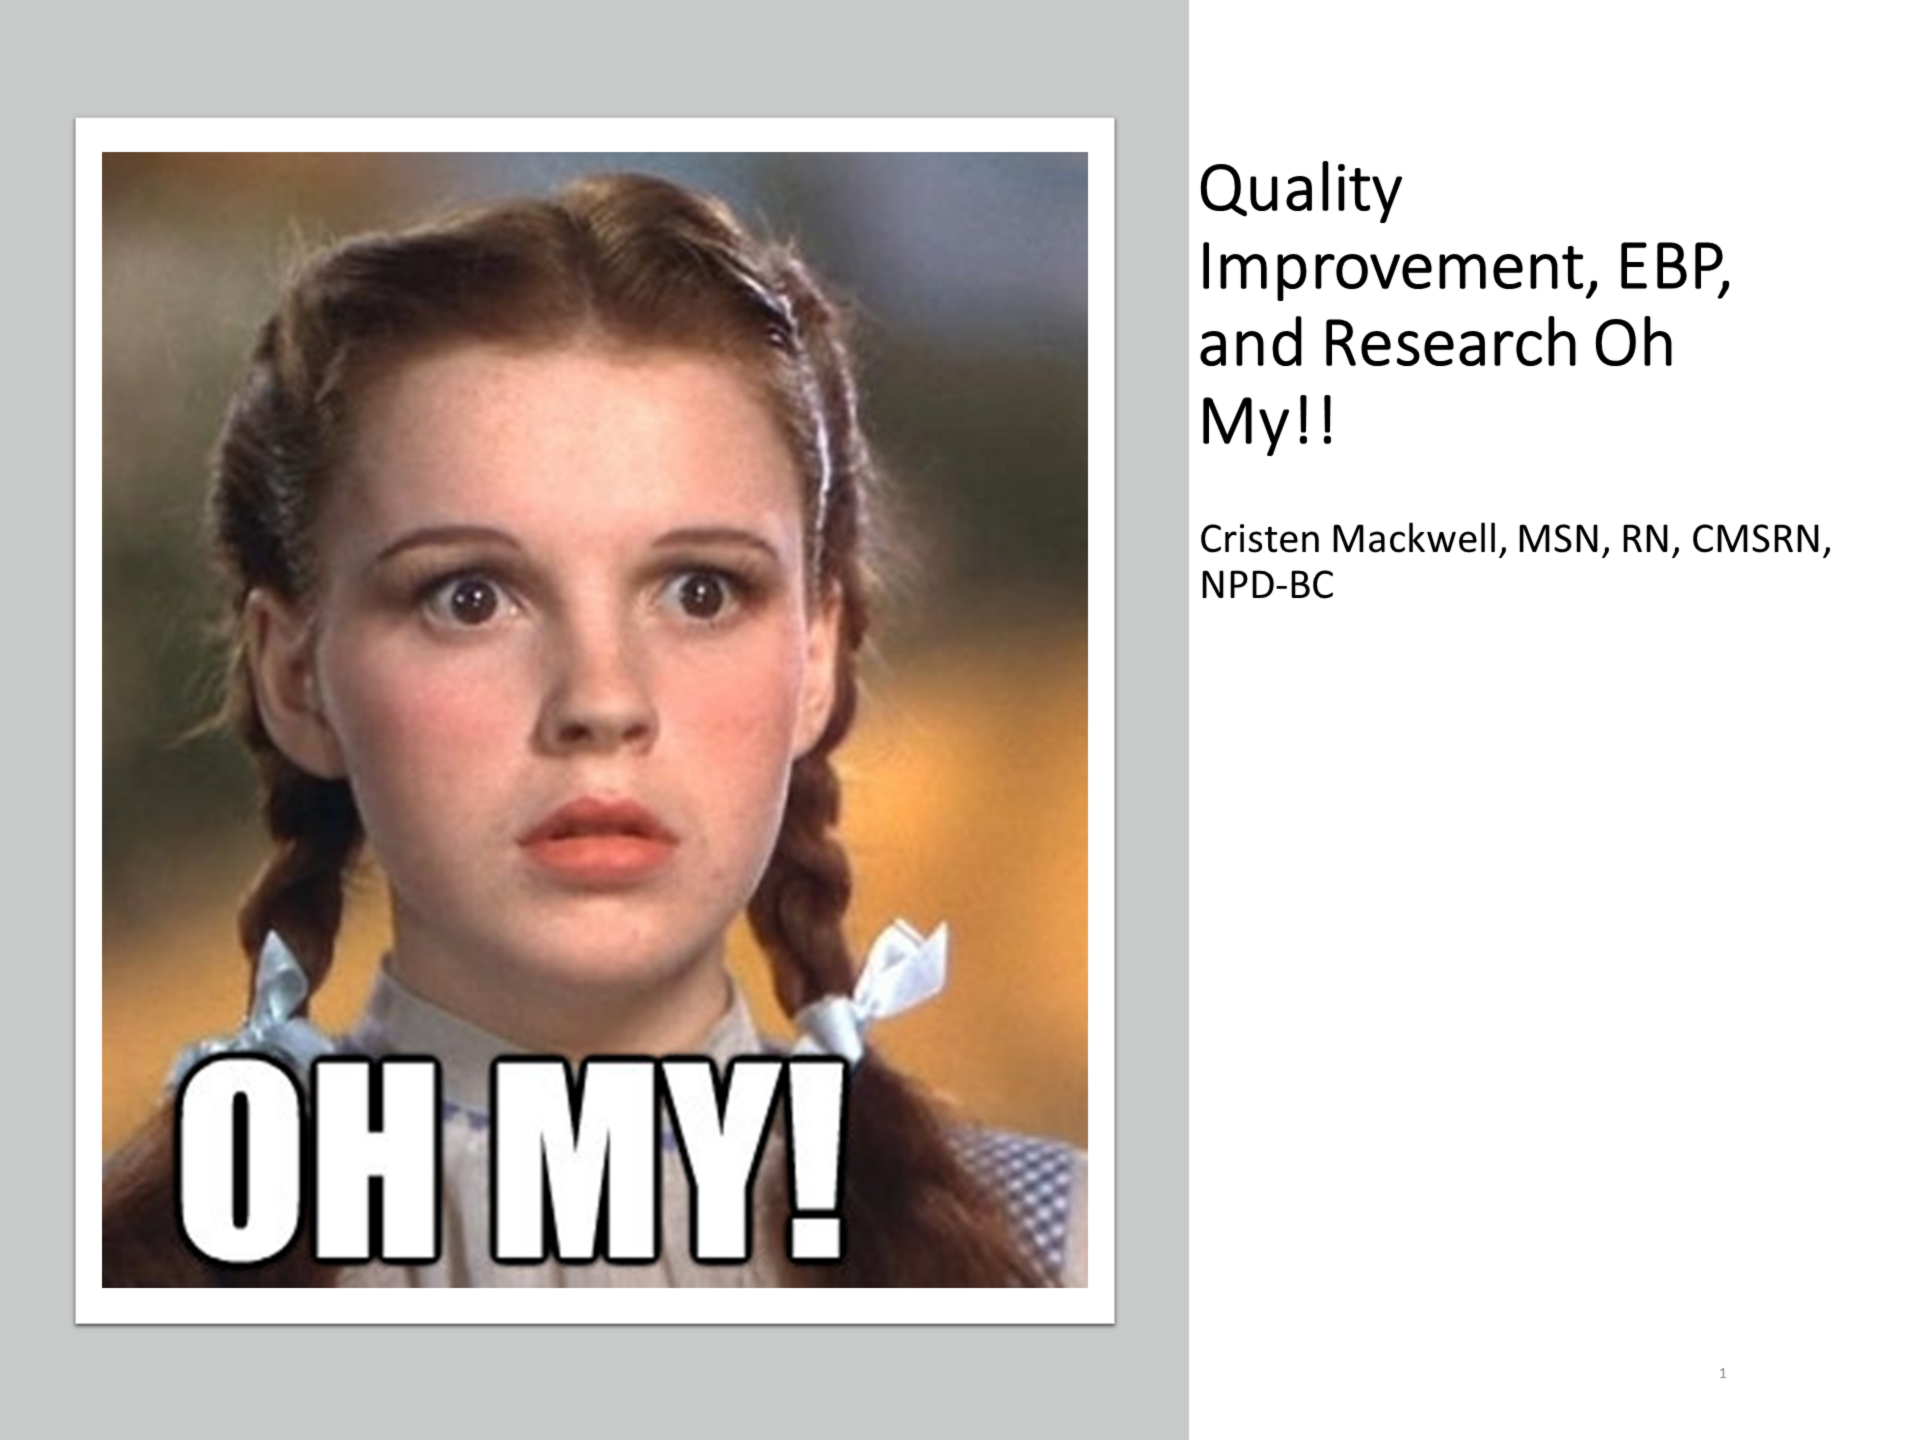 Evidence-Based Practice, Quality Improvement, and Research, Oh My!!